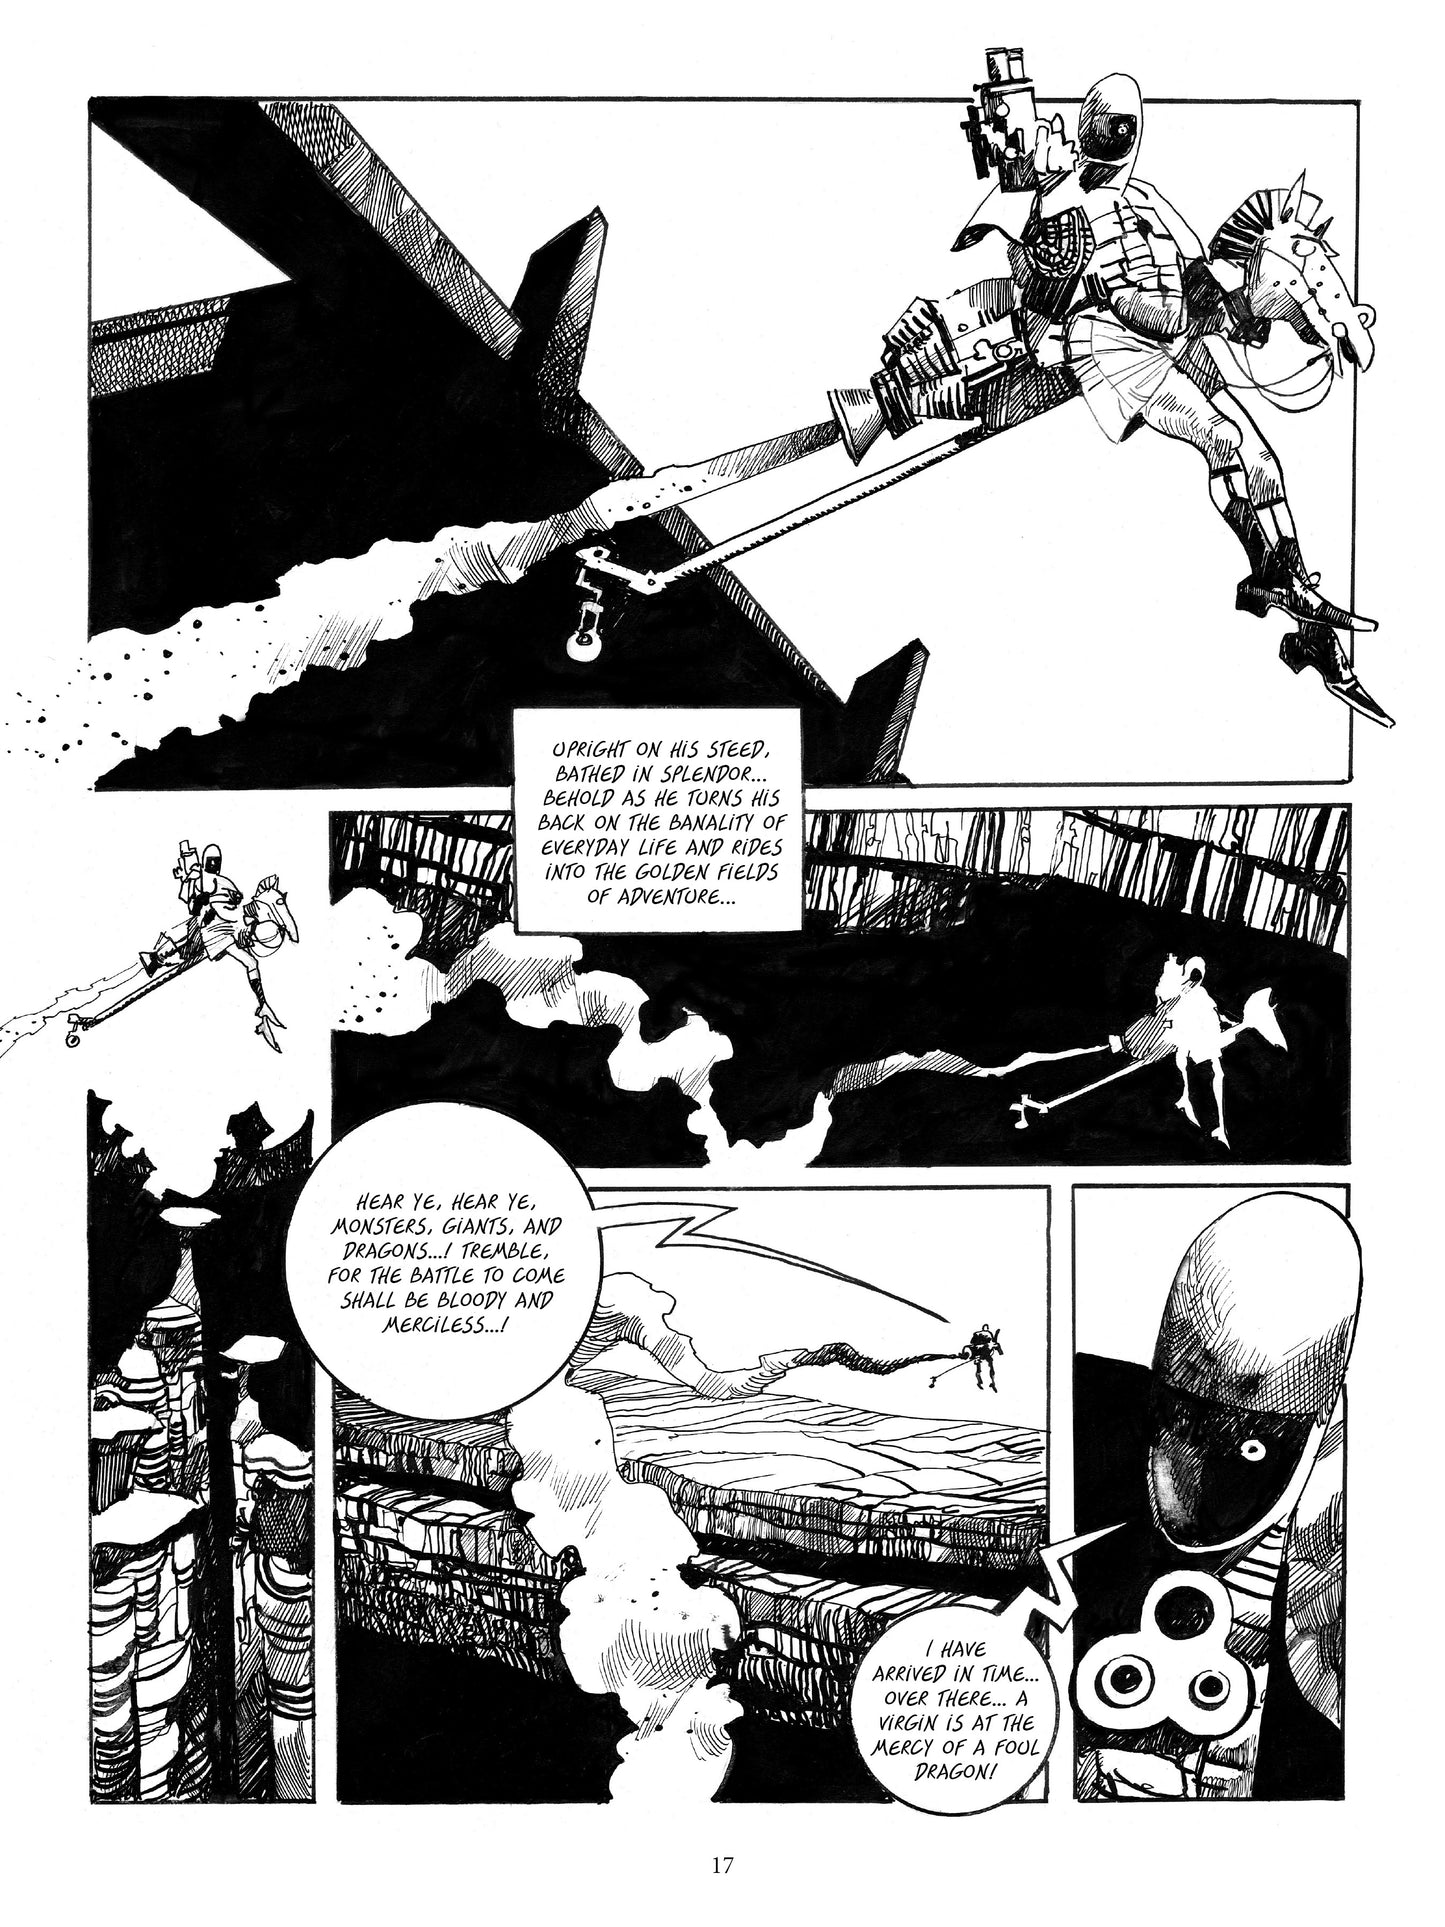 THE COLLECTED TOPPI vol. 10: Future Perfect, by Sergio Toppi